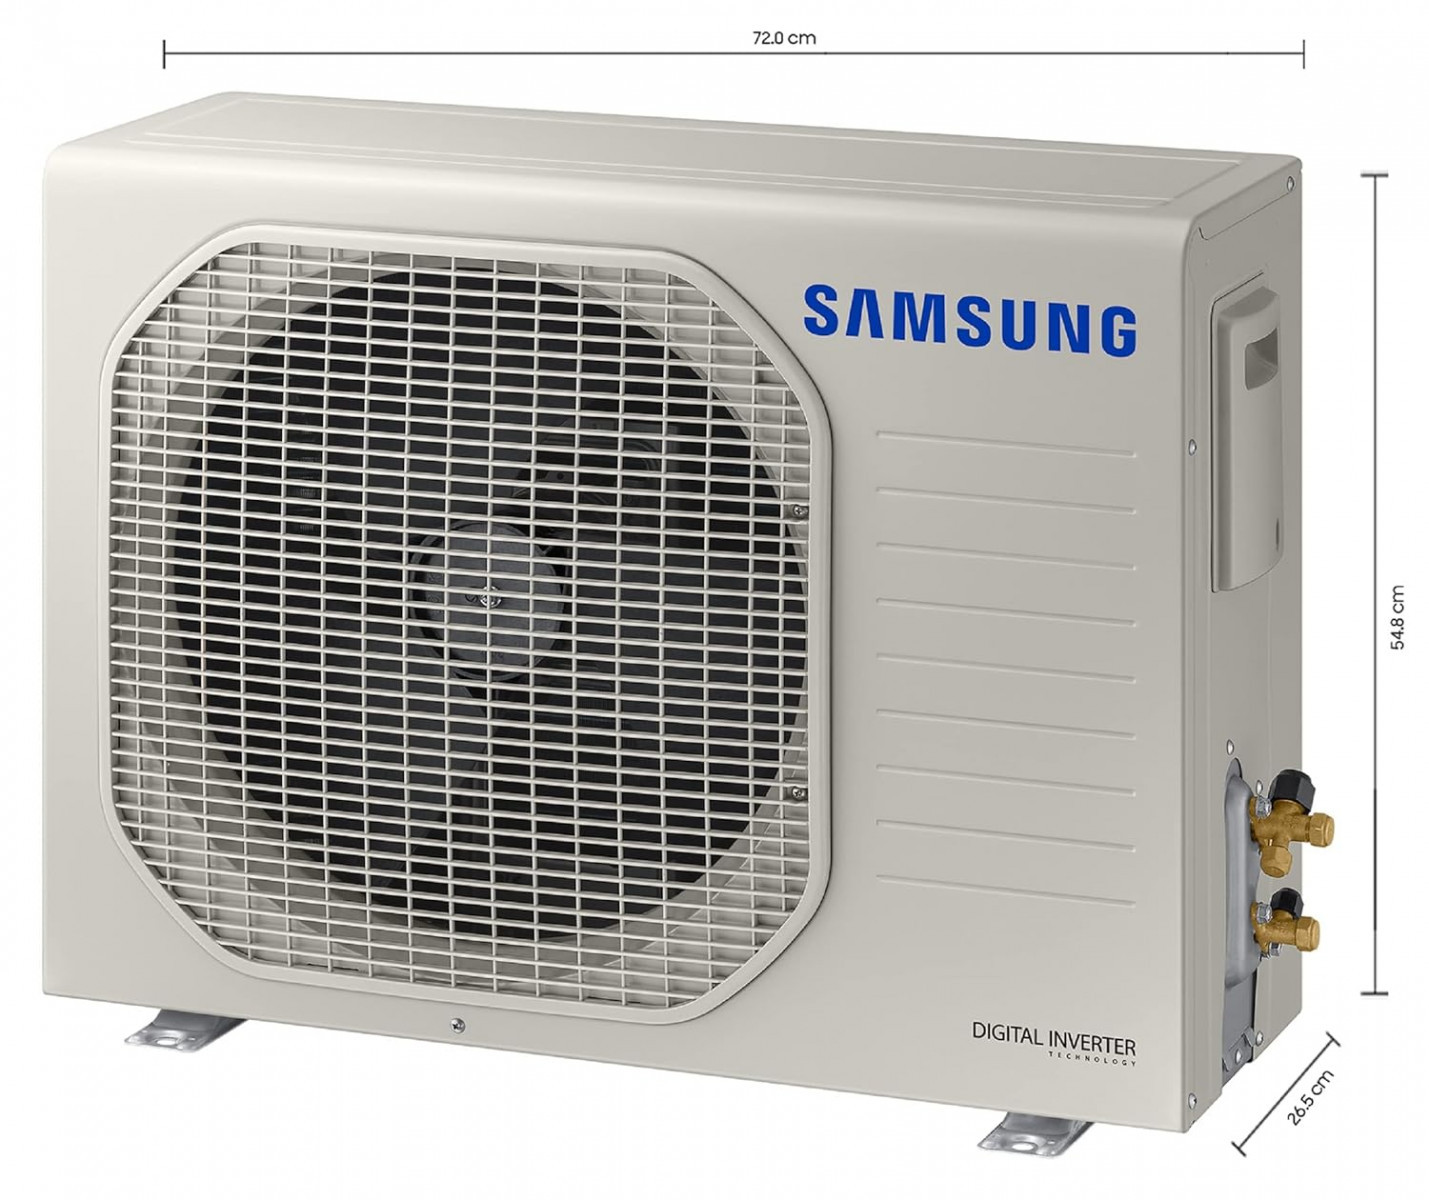 Samsung 15 Ton 3 Star Windfree Technology Inverter Split AC Copper Convertible 5-in-1 Cooling